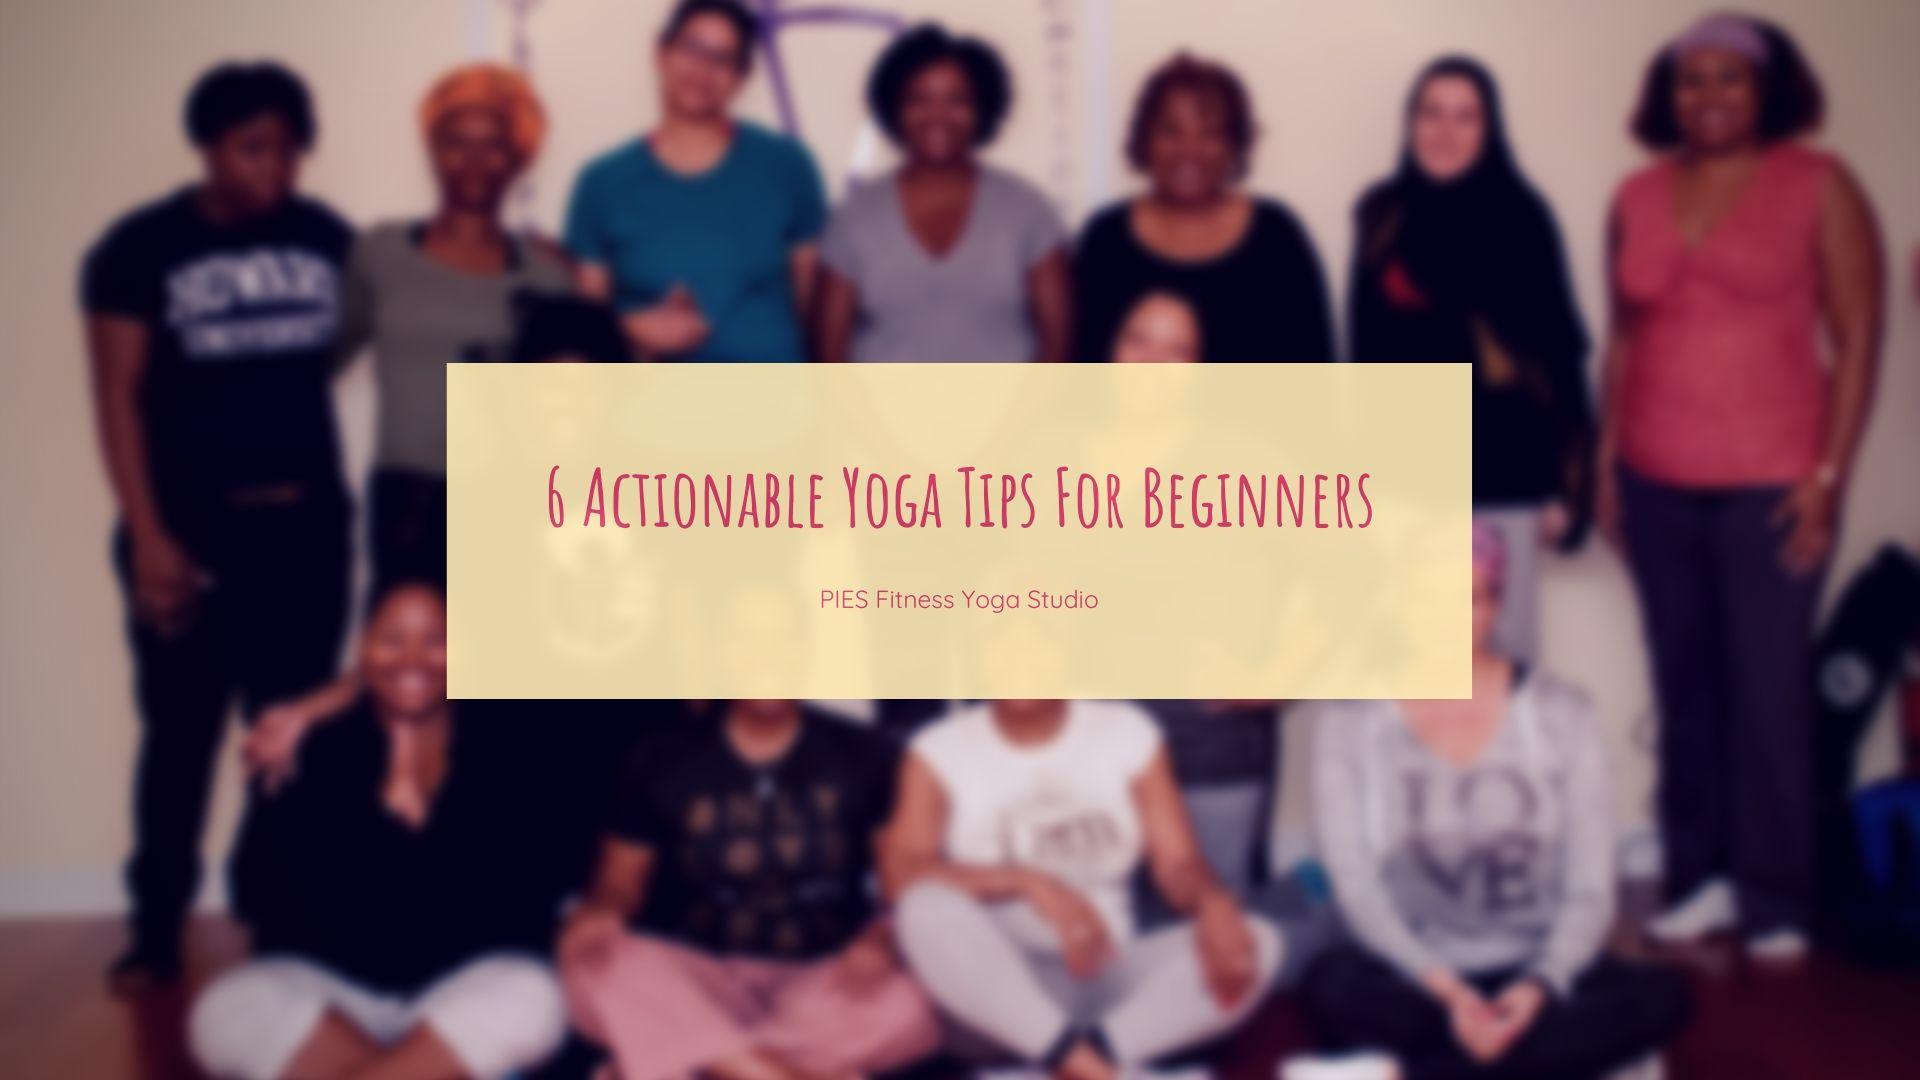 6 Actionable Yoga Tips For Beginners 